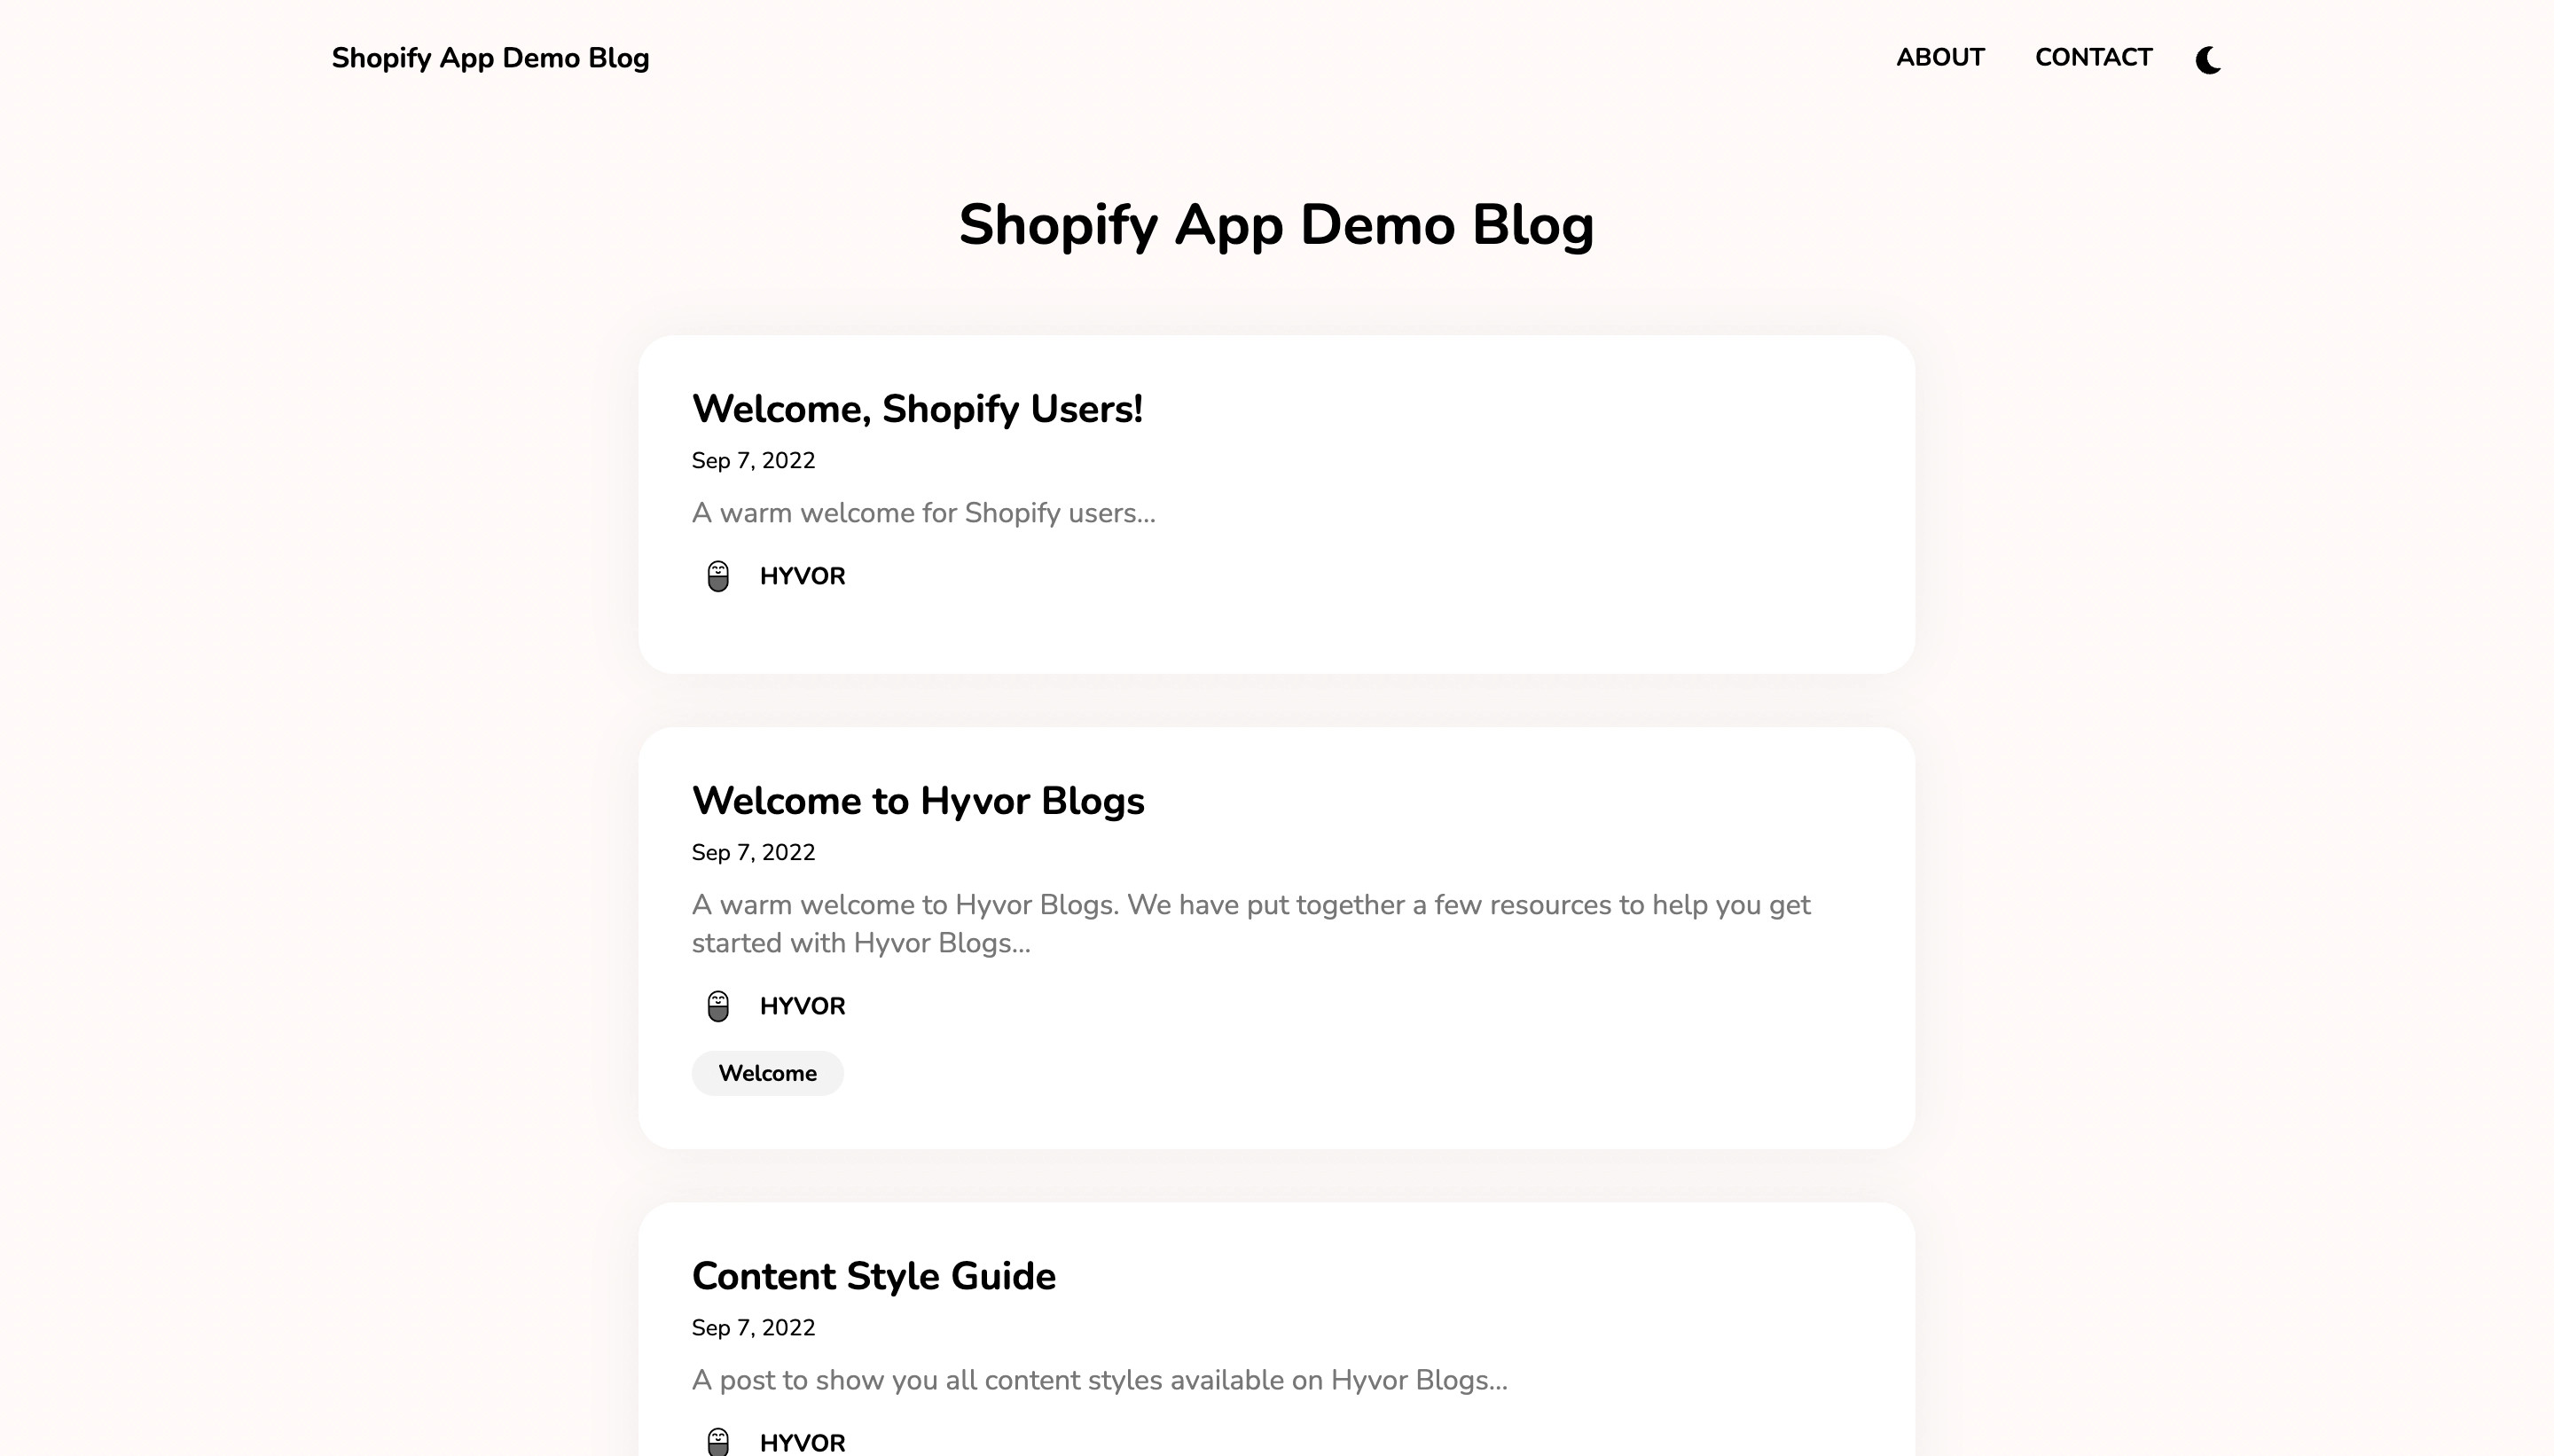 Blog added to your Shopify Online Store